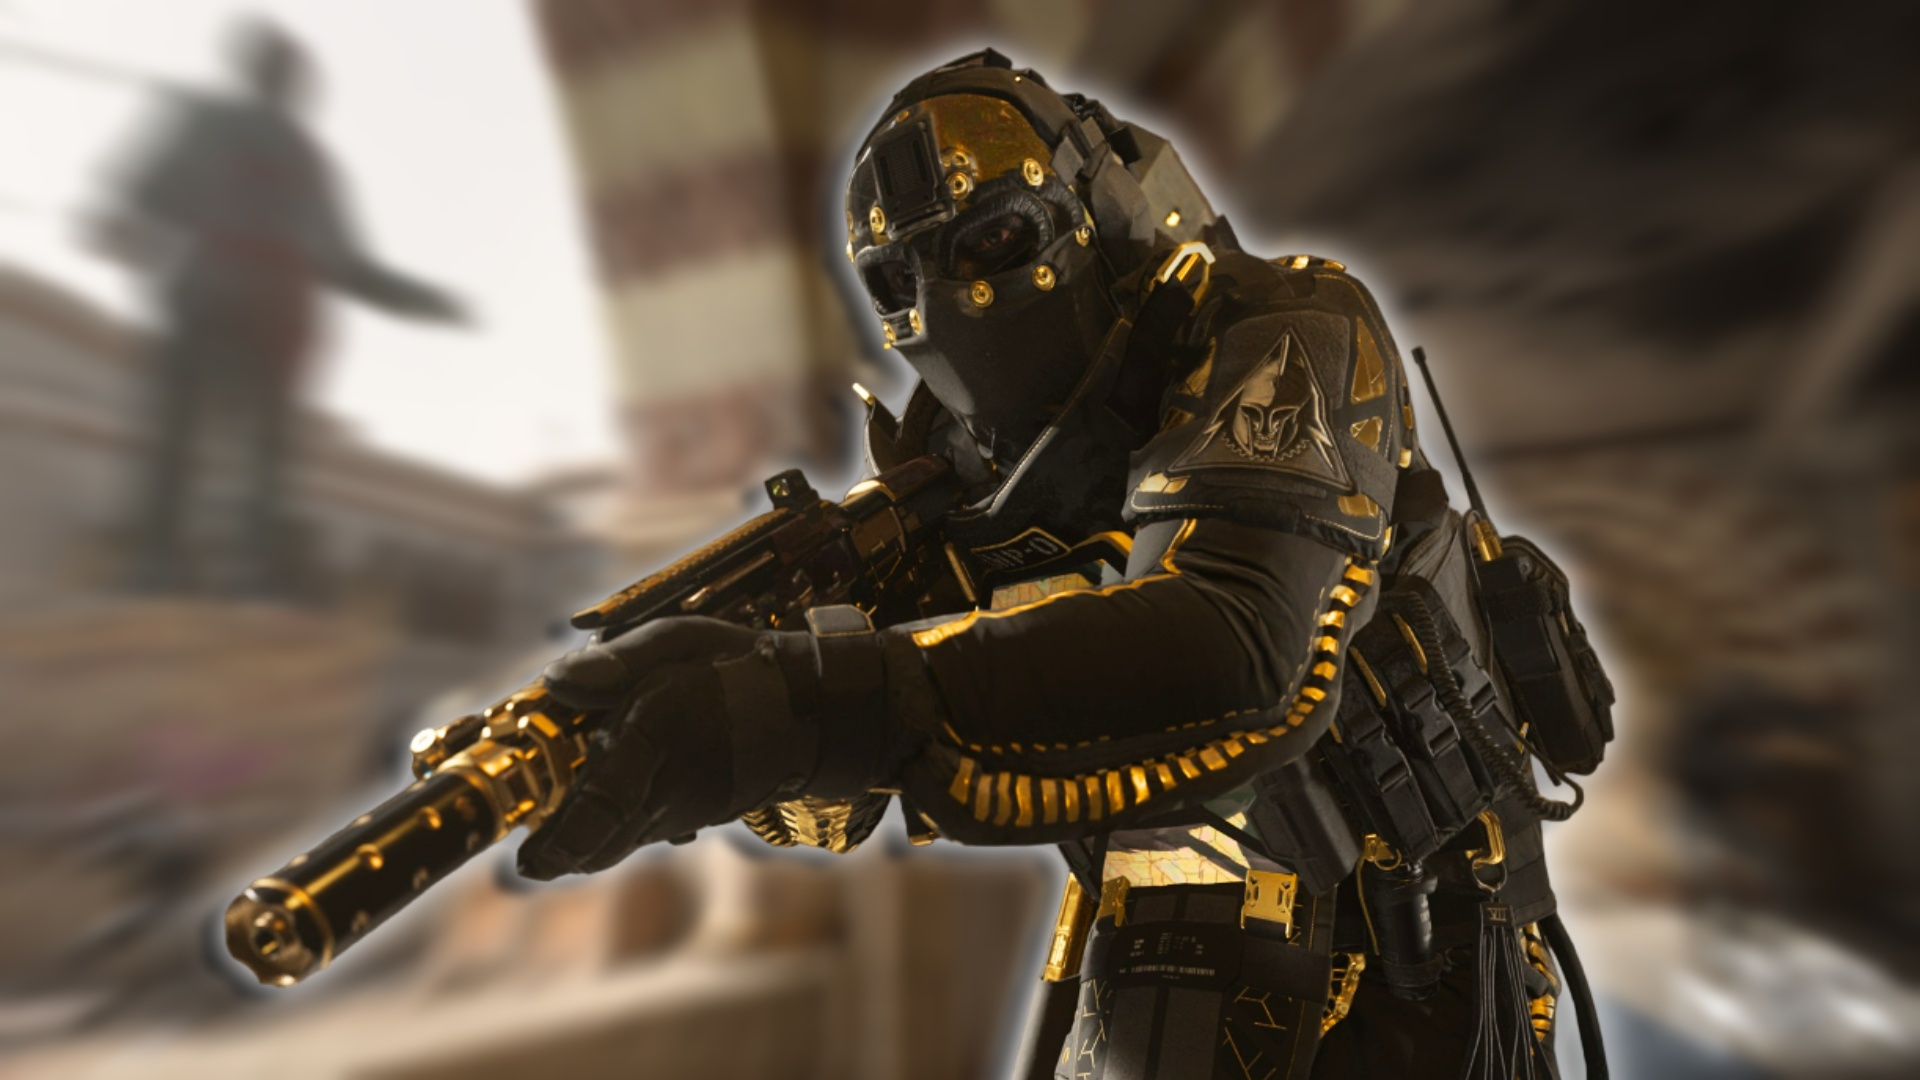 Call of Duty Warzone Season 1 patch notes brings excitement